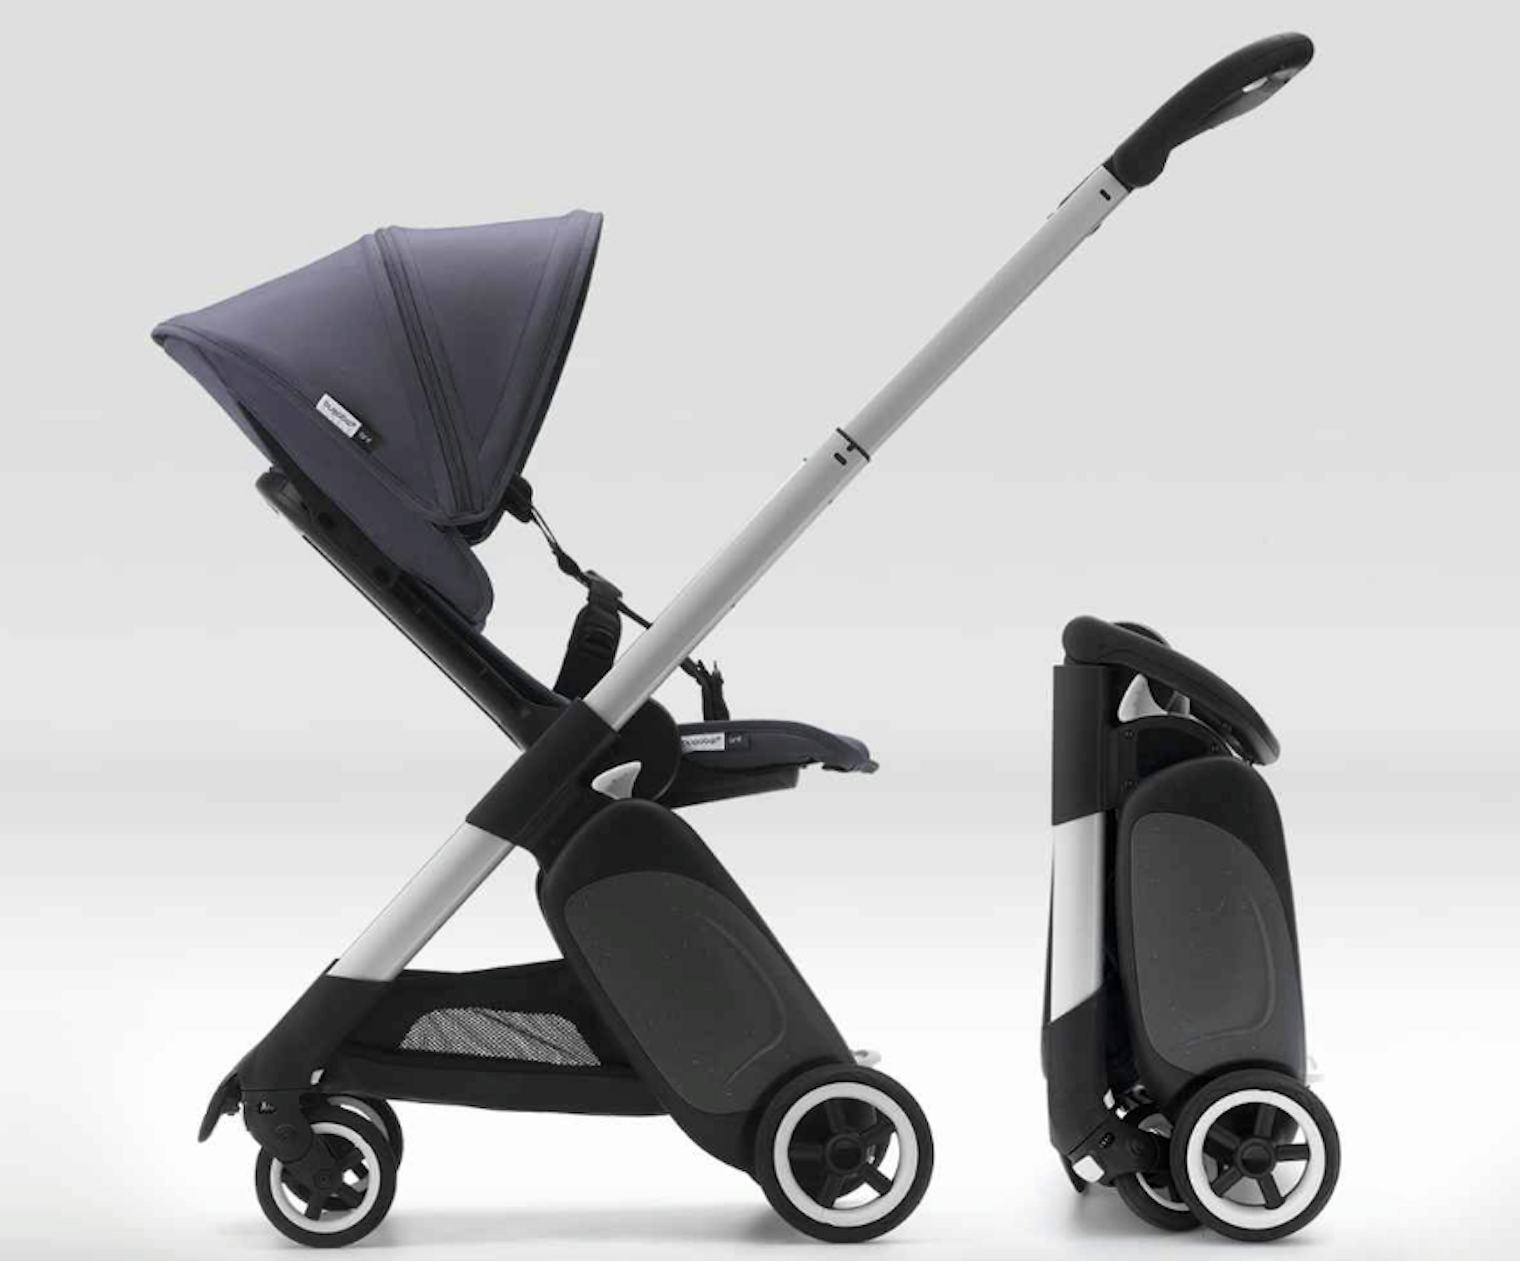 Bugaboo's Travel Stroller 'Ant' Is Compact, Lightweight, & Made For